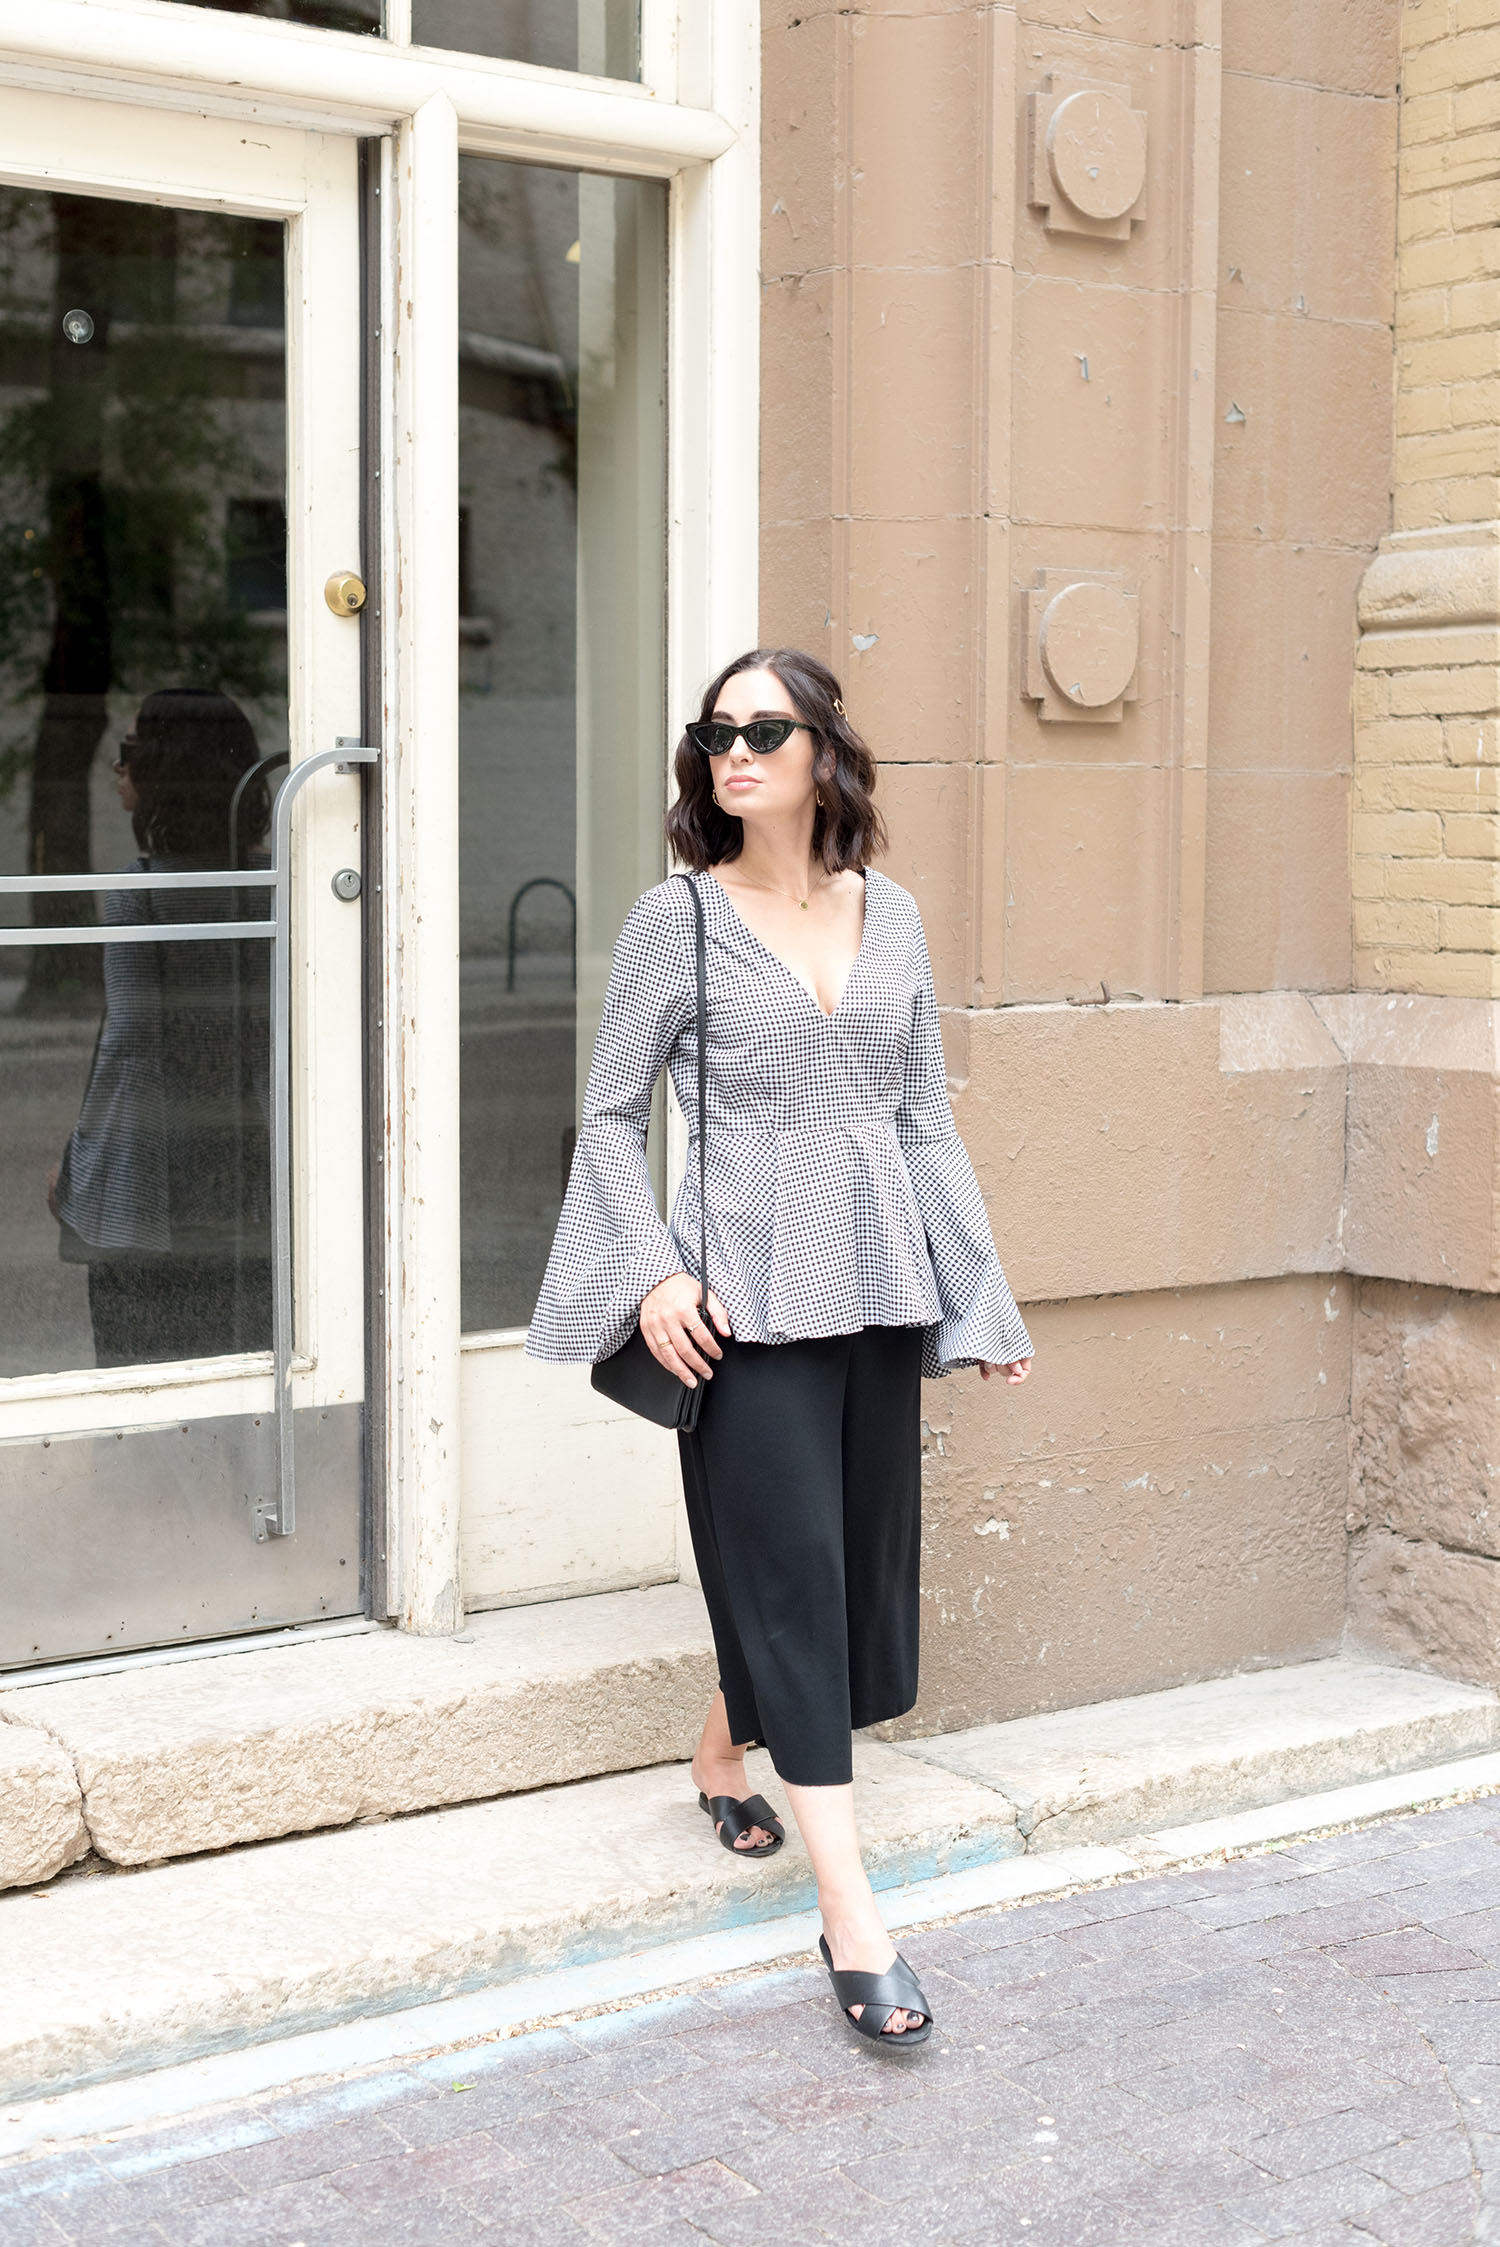 Top Winnipeg fashion blogger Cee Fardoe of Coco & Vera walks in The Exchange District wearing a L'academia blouse and carrying a Celine trio bag